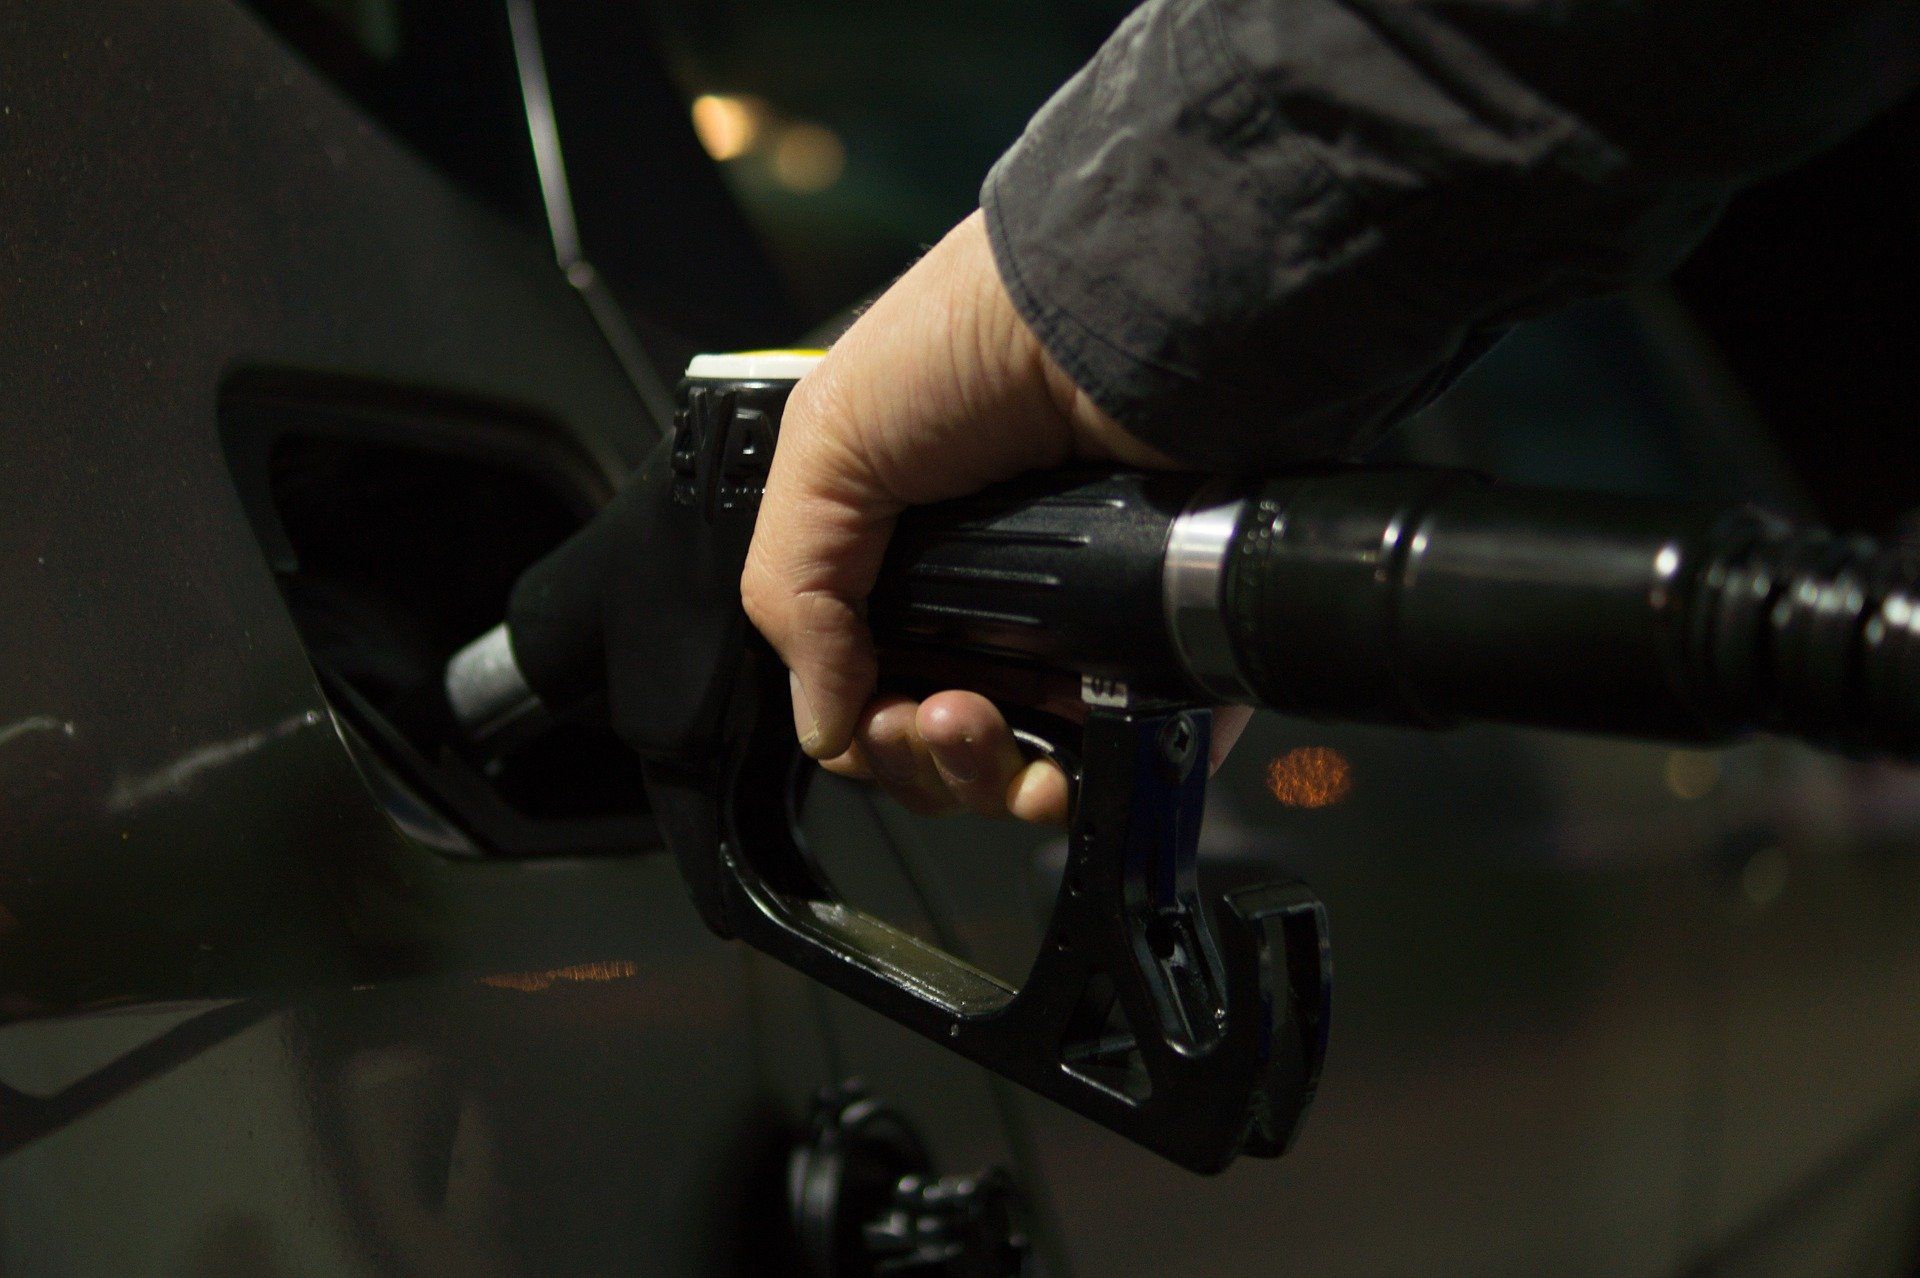 Fuel prices: Petrol priced at Rs 99.41, diesel Rs 90.77 in Delhi on March 28, 2022